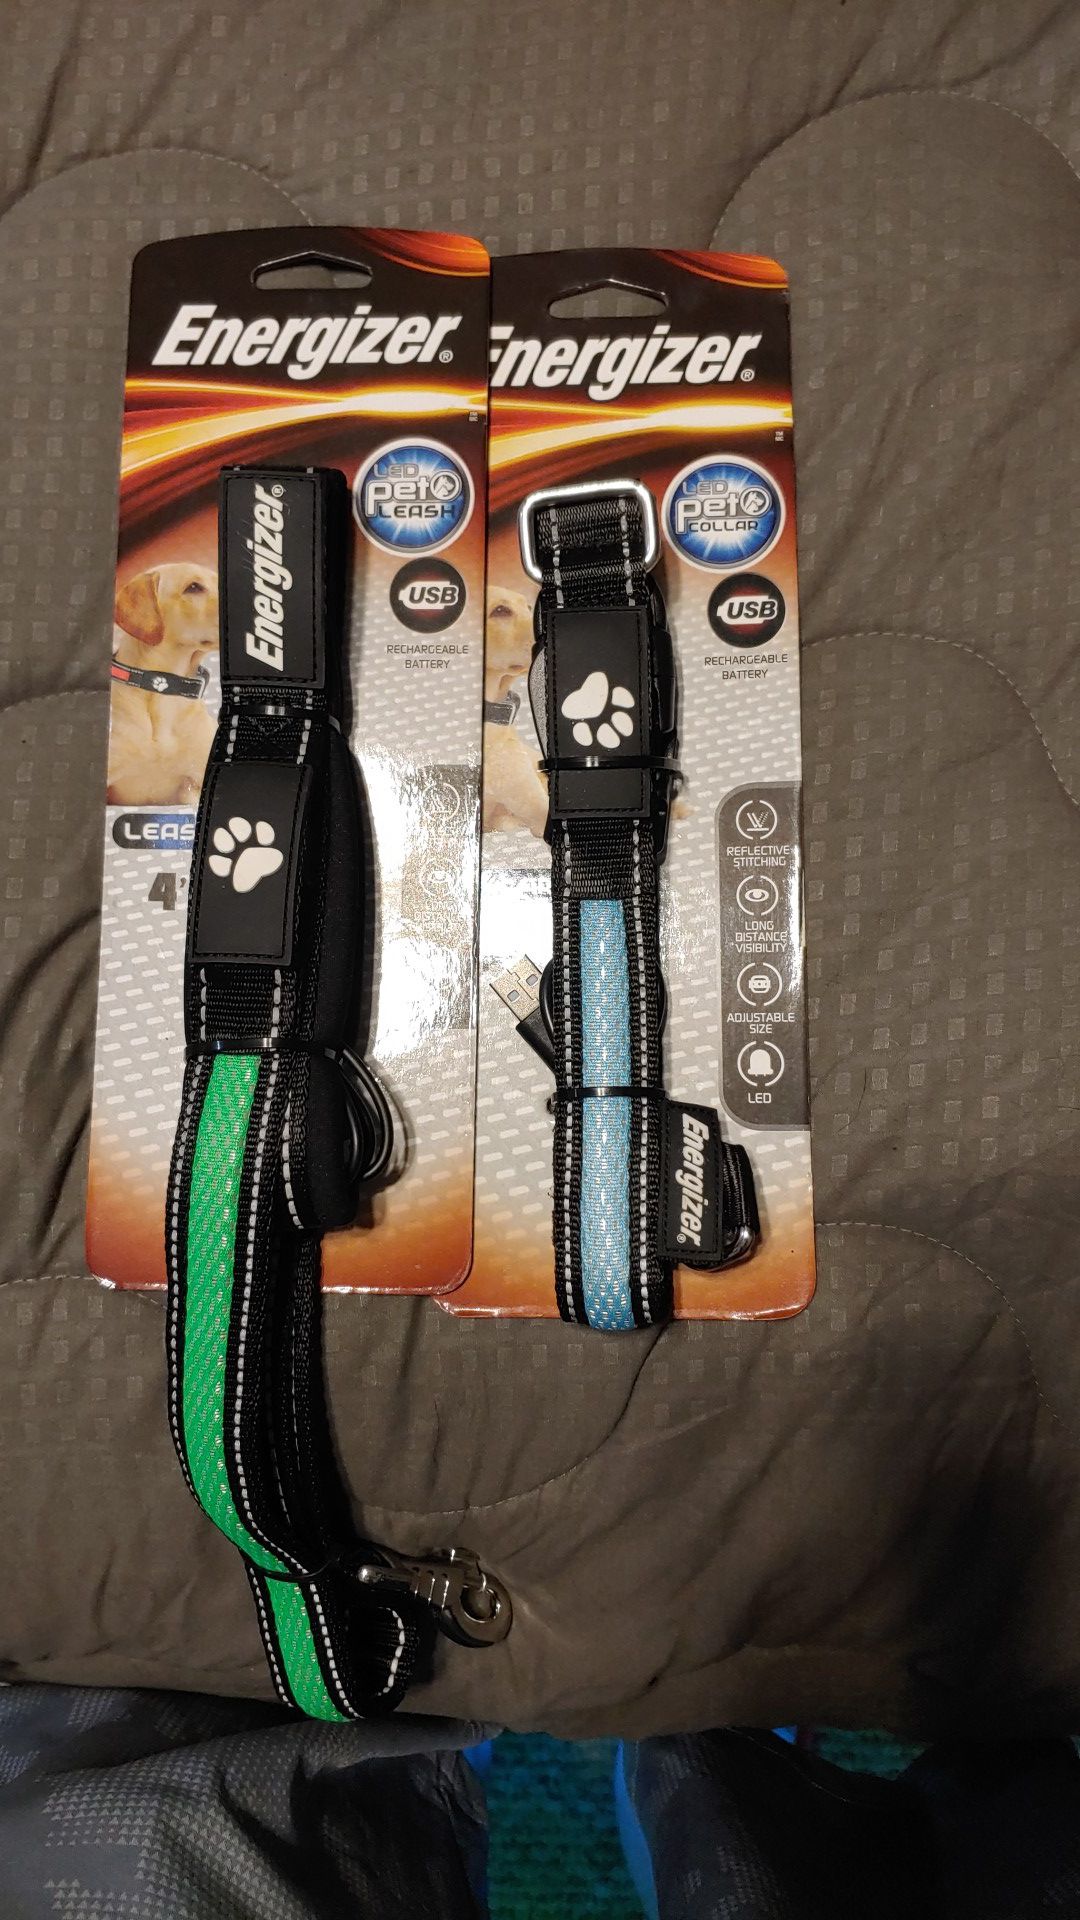 Energizer led pet leash and collar